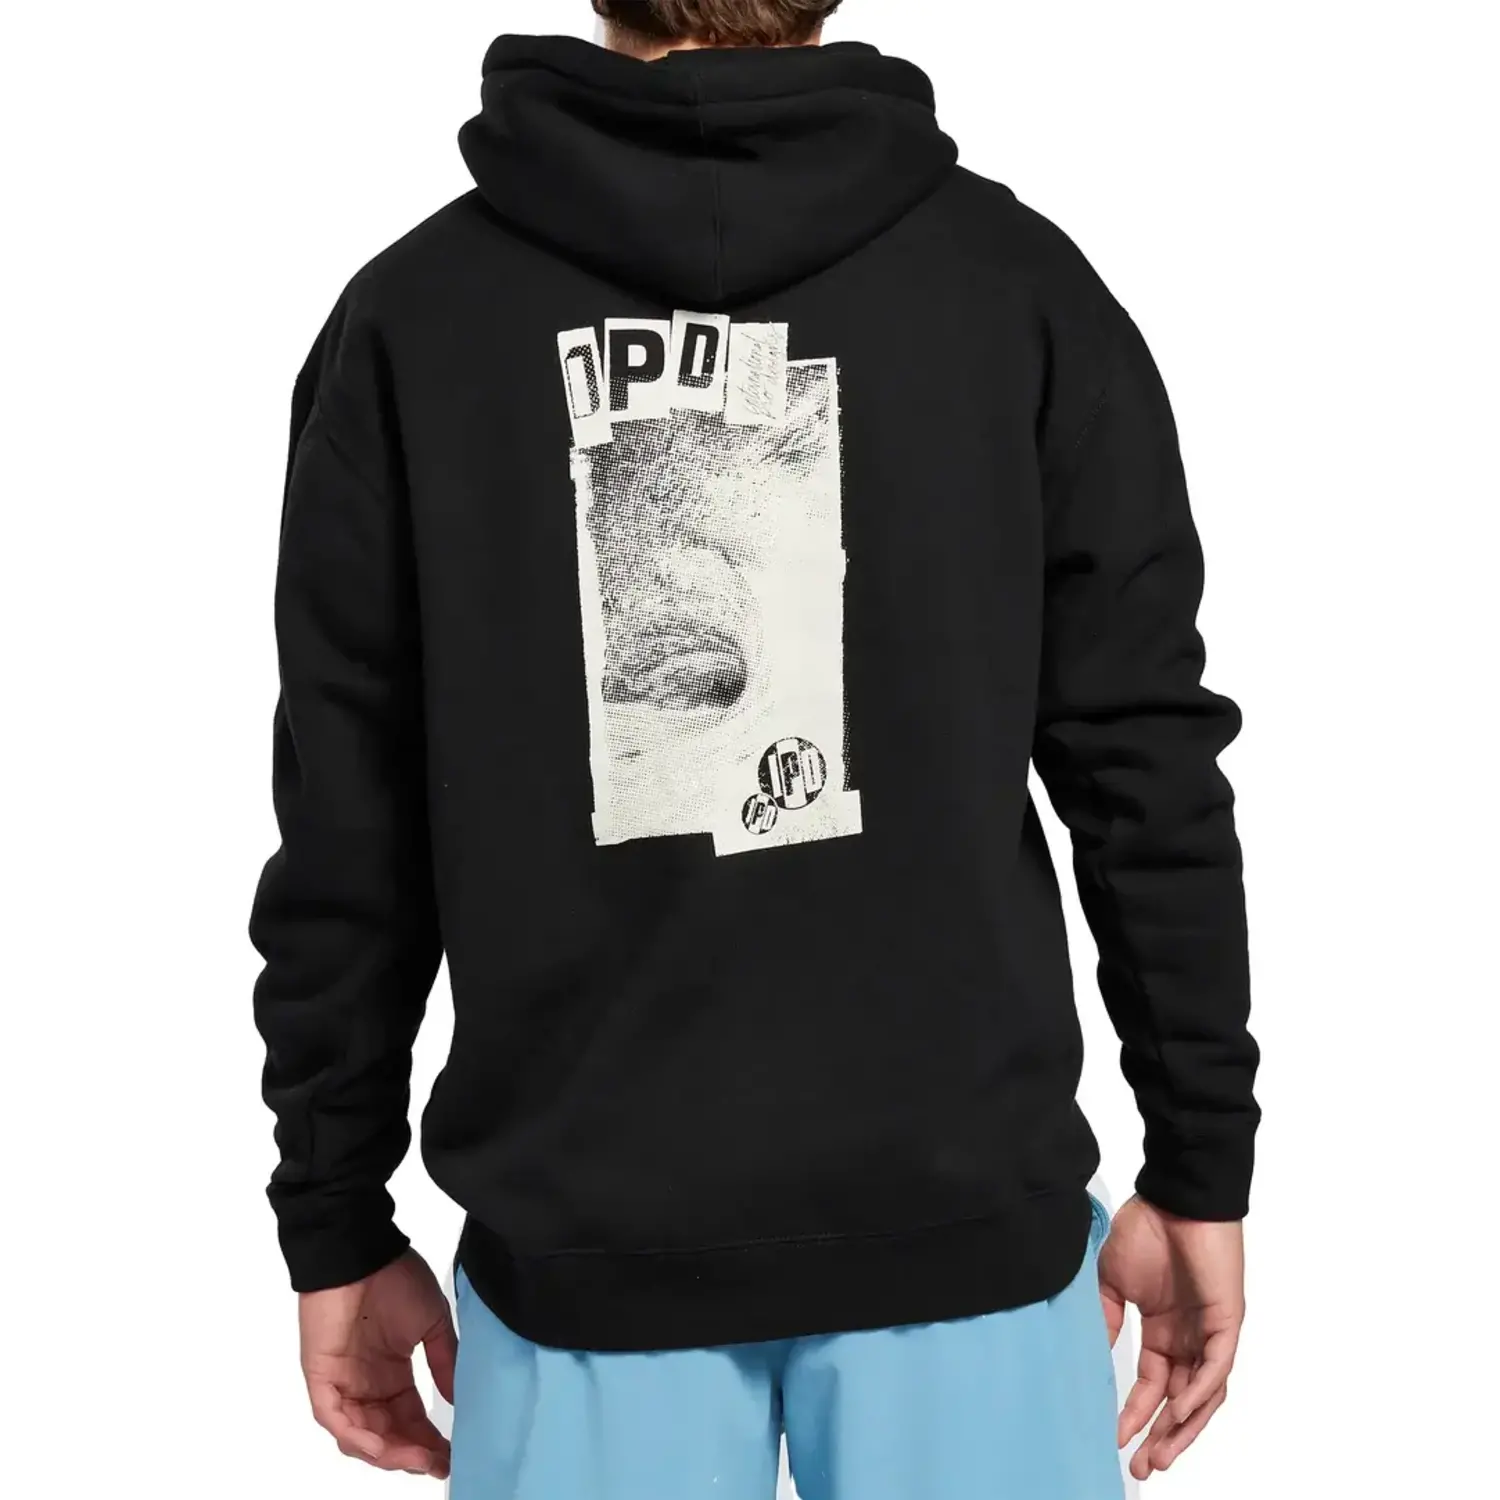 IPD 423 WEDGE PULLOVER - Whalebone Surf Shop